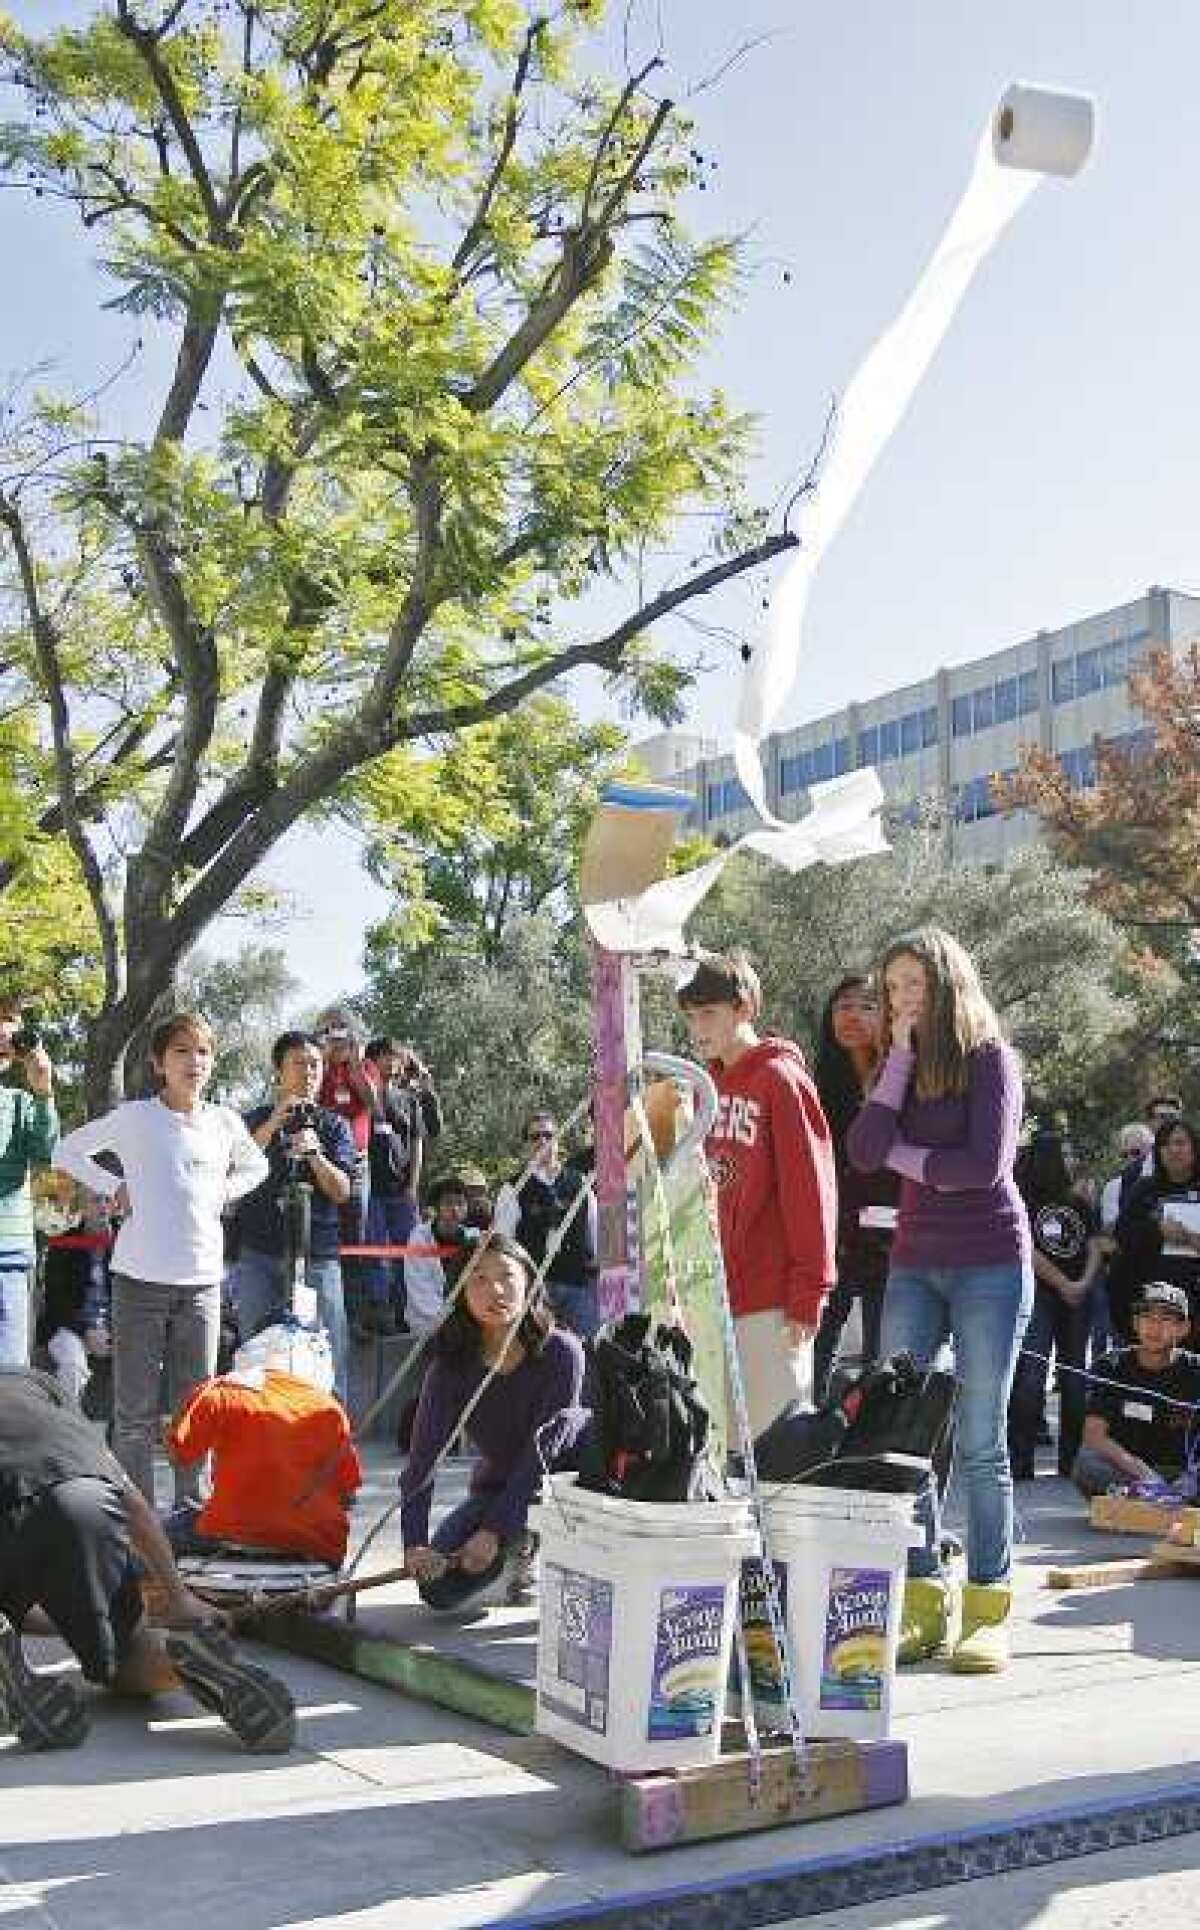 South Pasadena High School's catapult is triggered and a roll of toilet paper flies forward in the JPL Invention Challenge. High school teams propelled tissue rolls catapults.